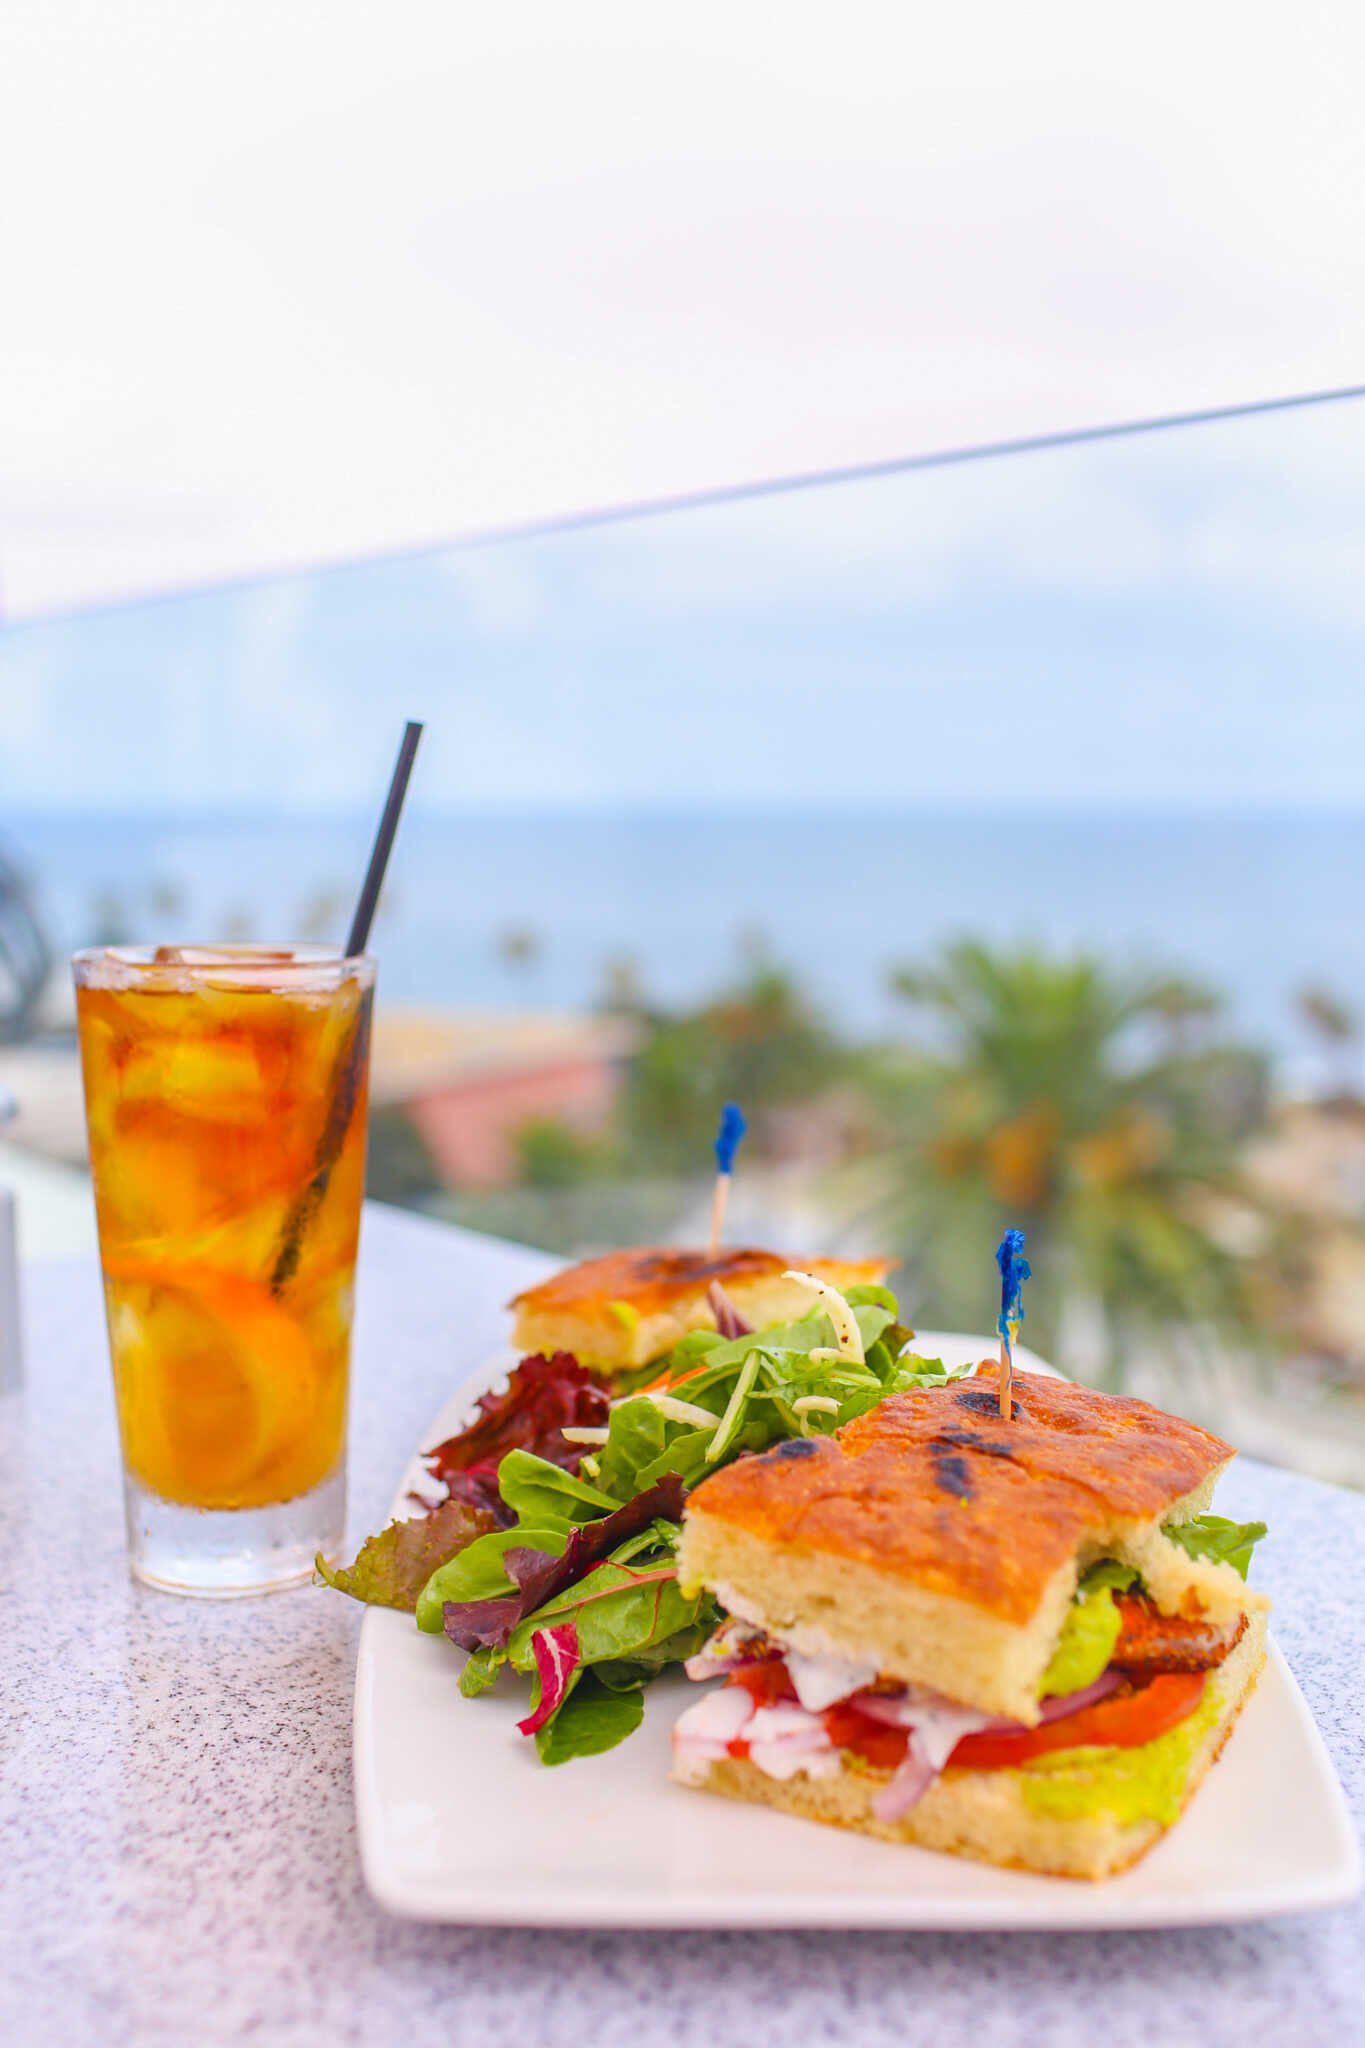 Weekend Guide to La Jolla - Sandwich lunch at George’s at the Cove.